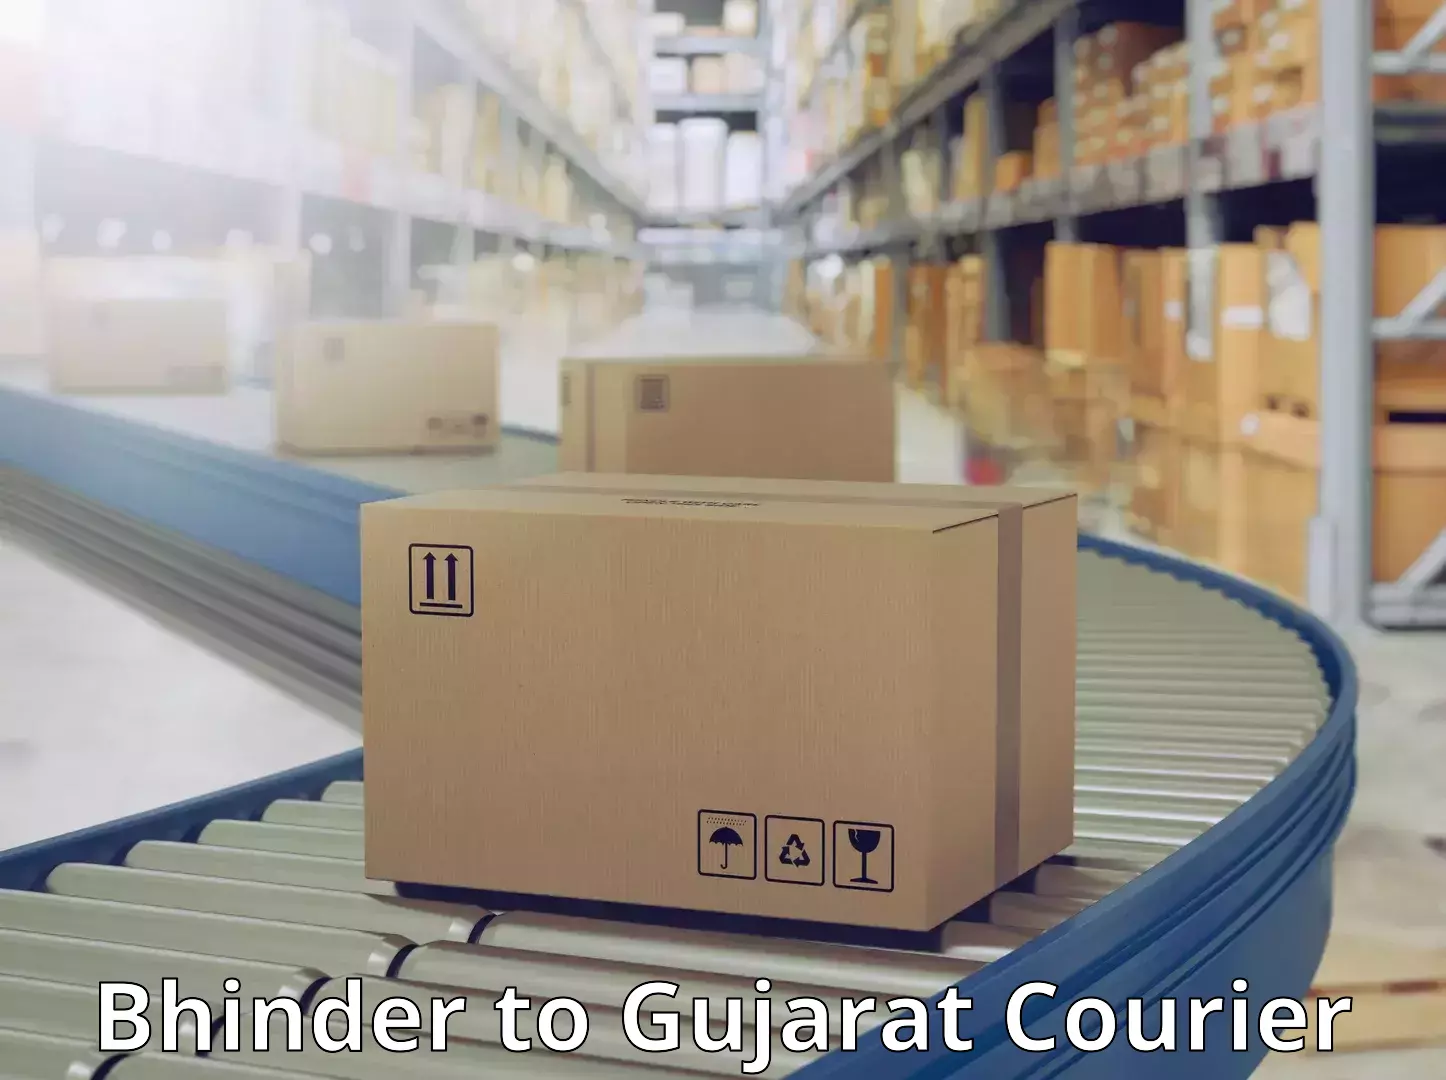 State-of-the-art courier technology Bhinder to Dang